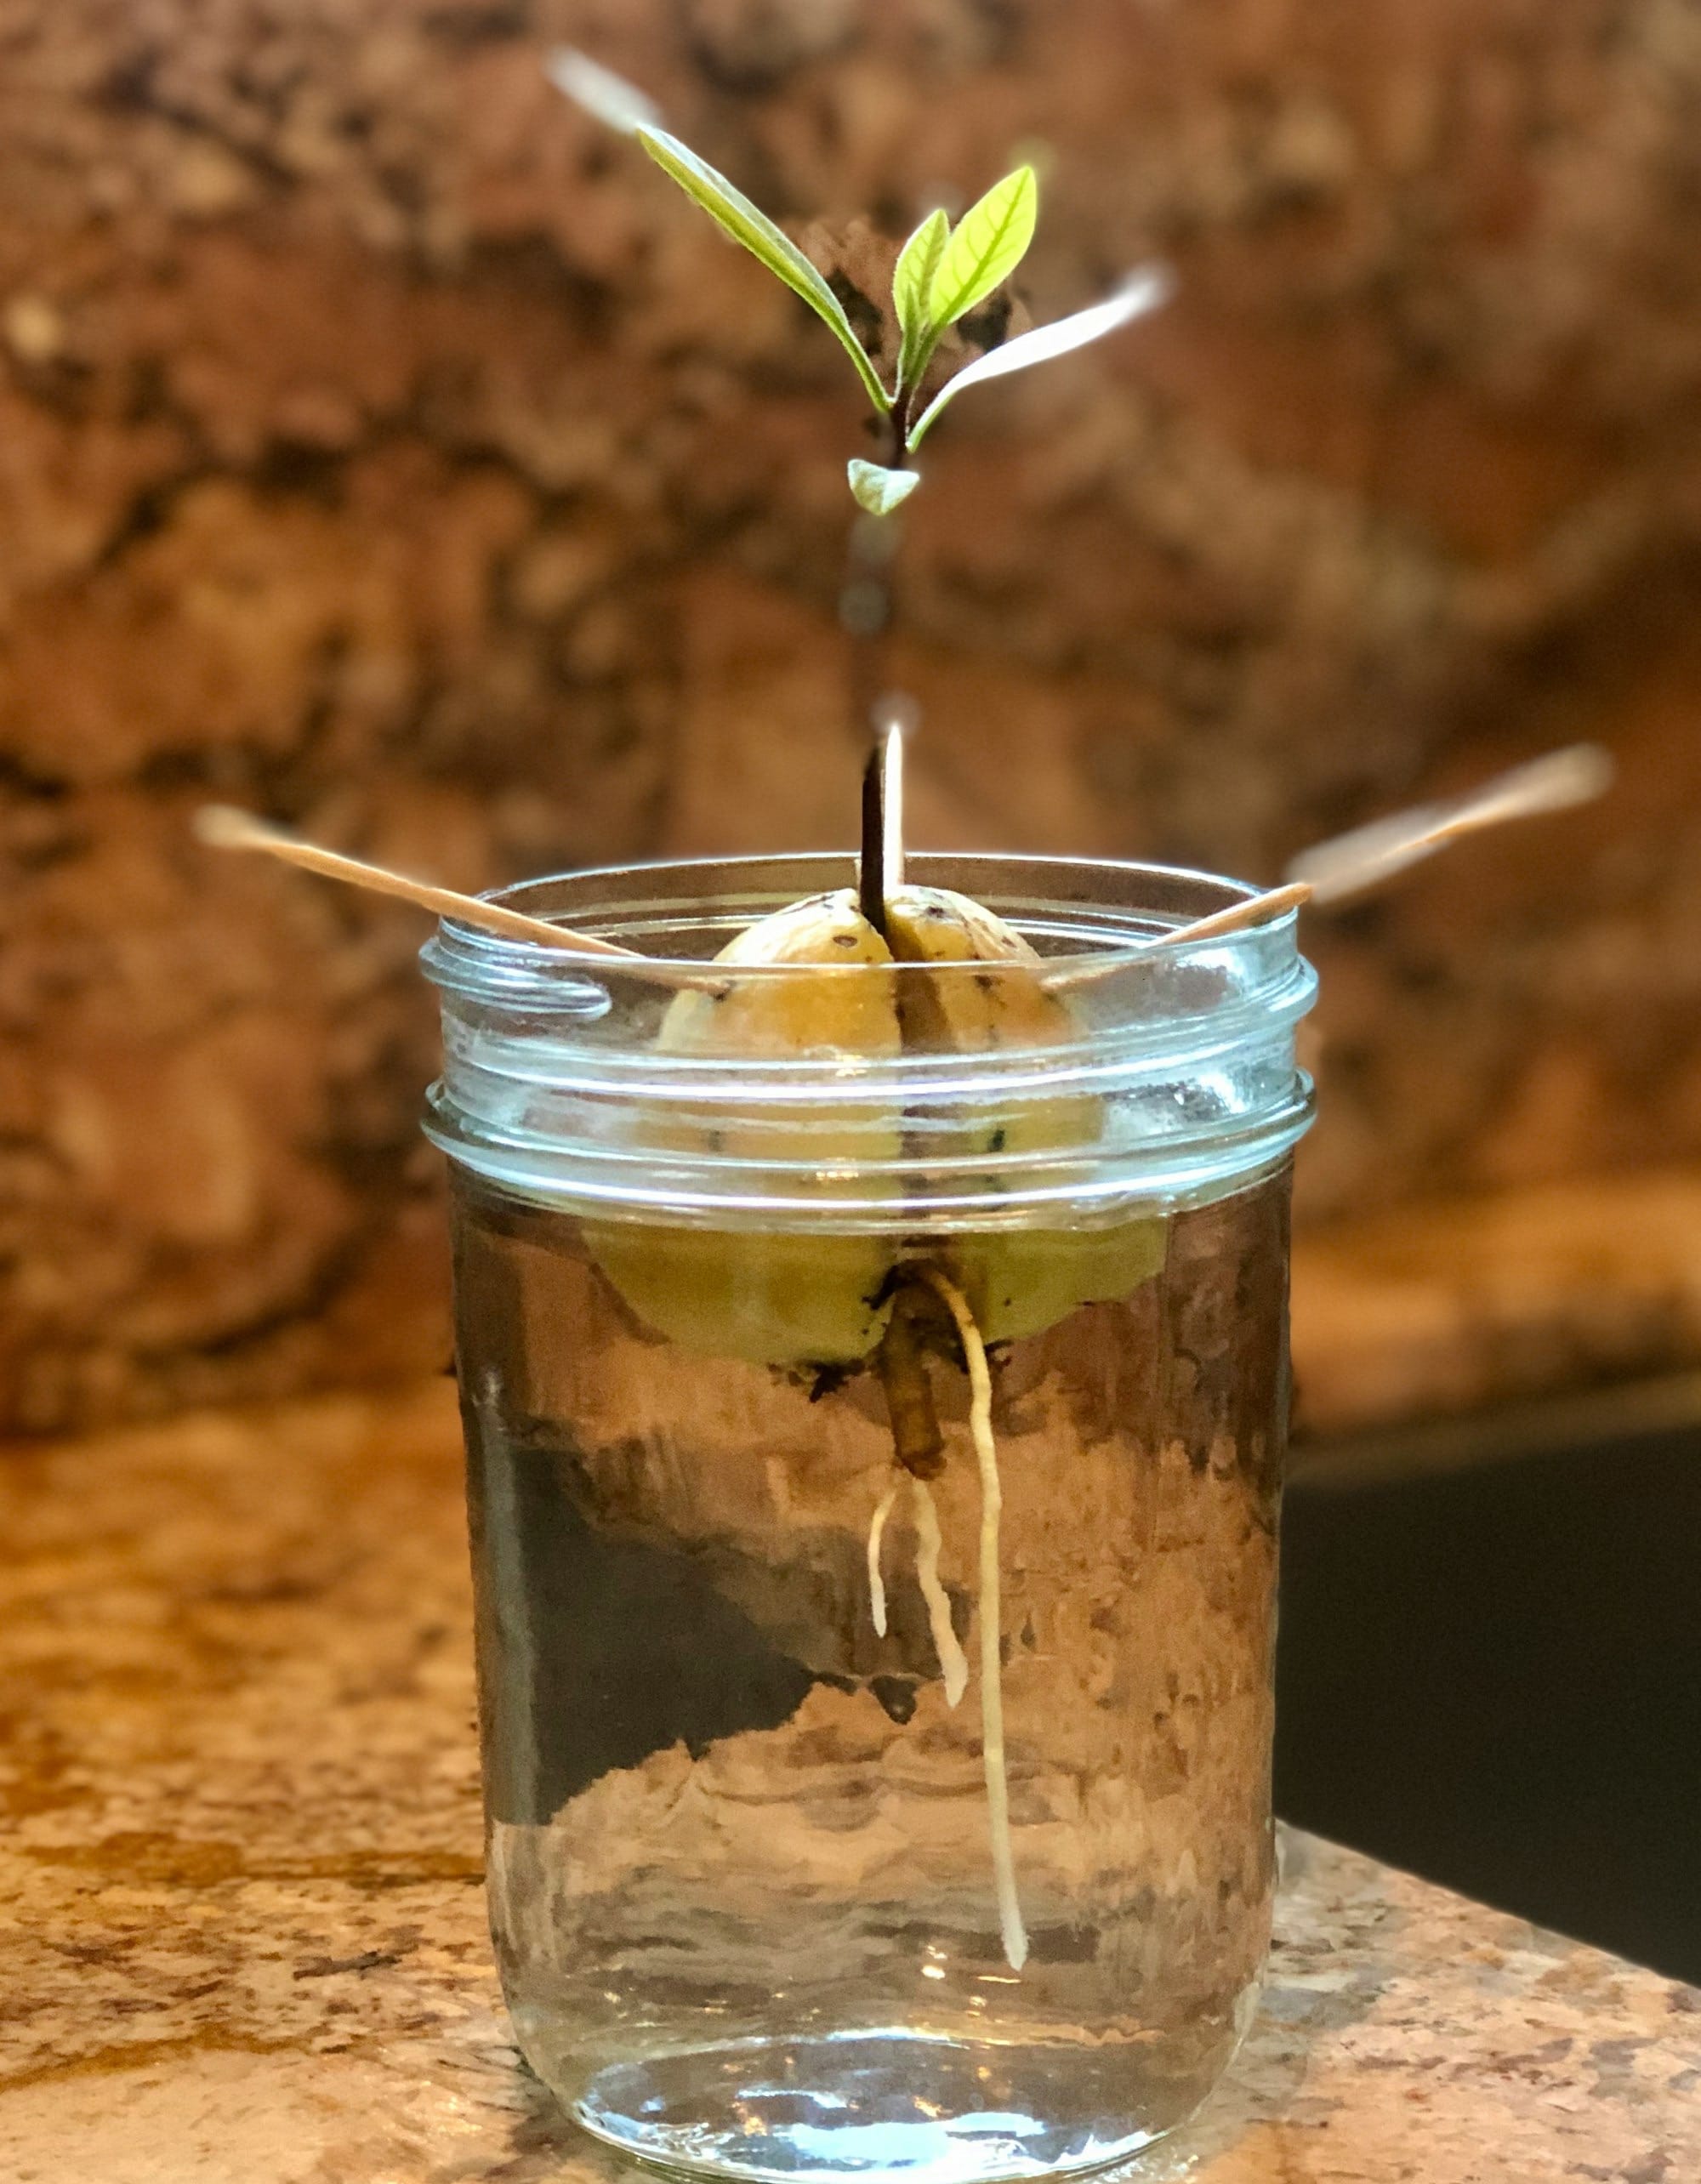 Avocado seed sprouting